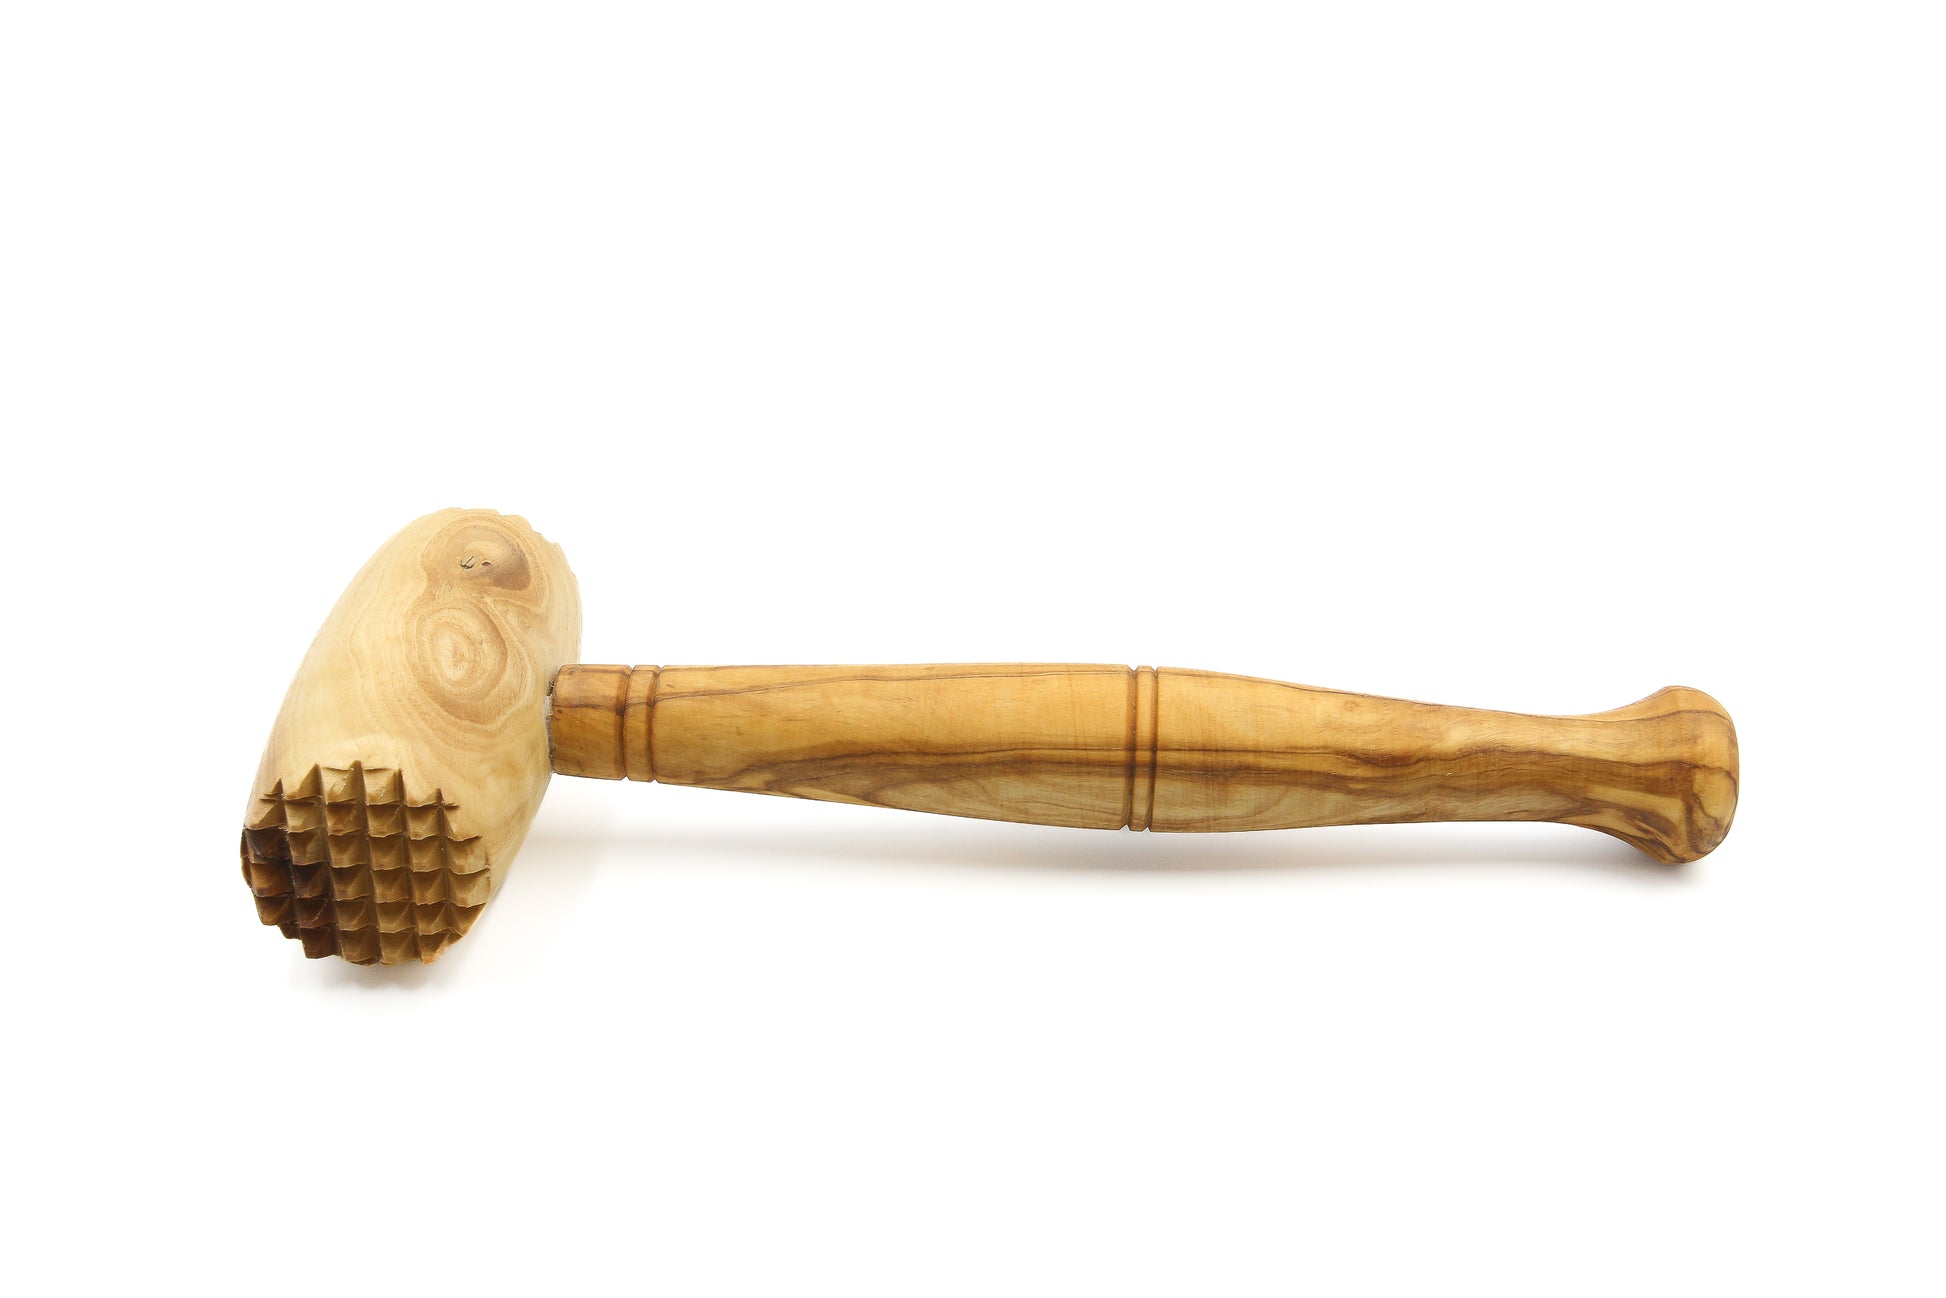 Artisan-made meat hammer in beautiful olive wood